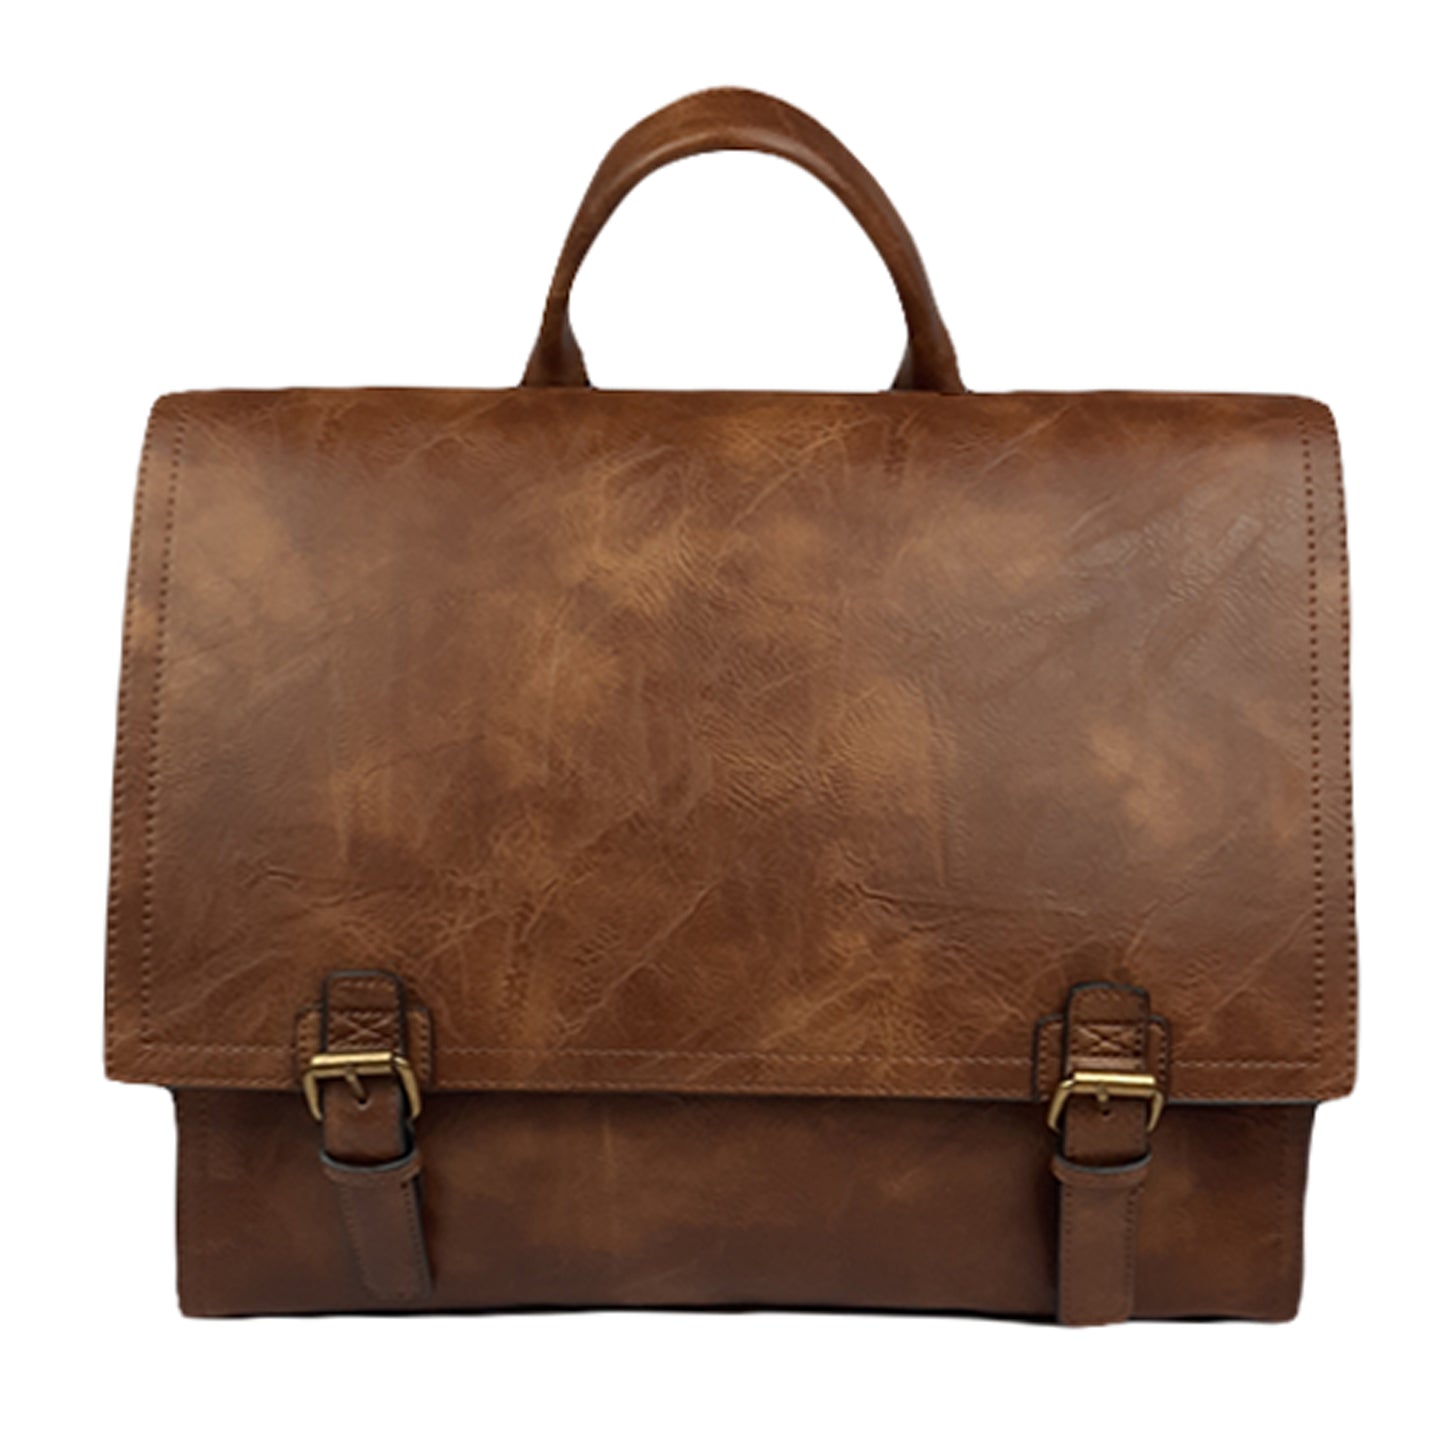 Briefcase Bag with Tampa Straps 0501024